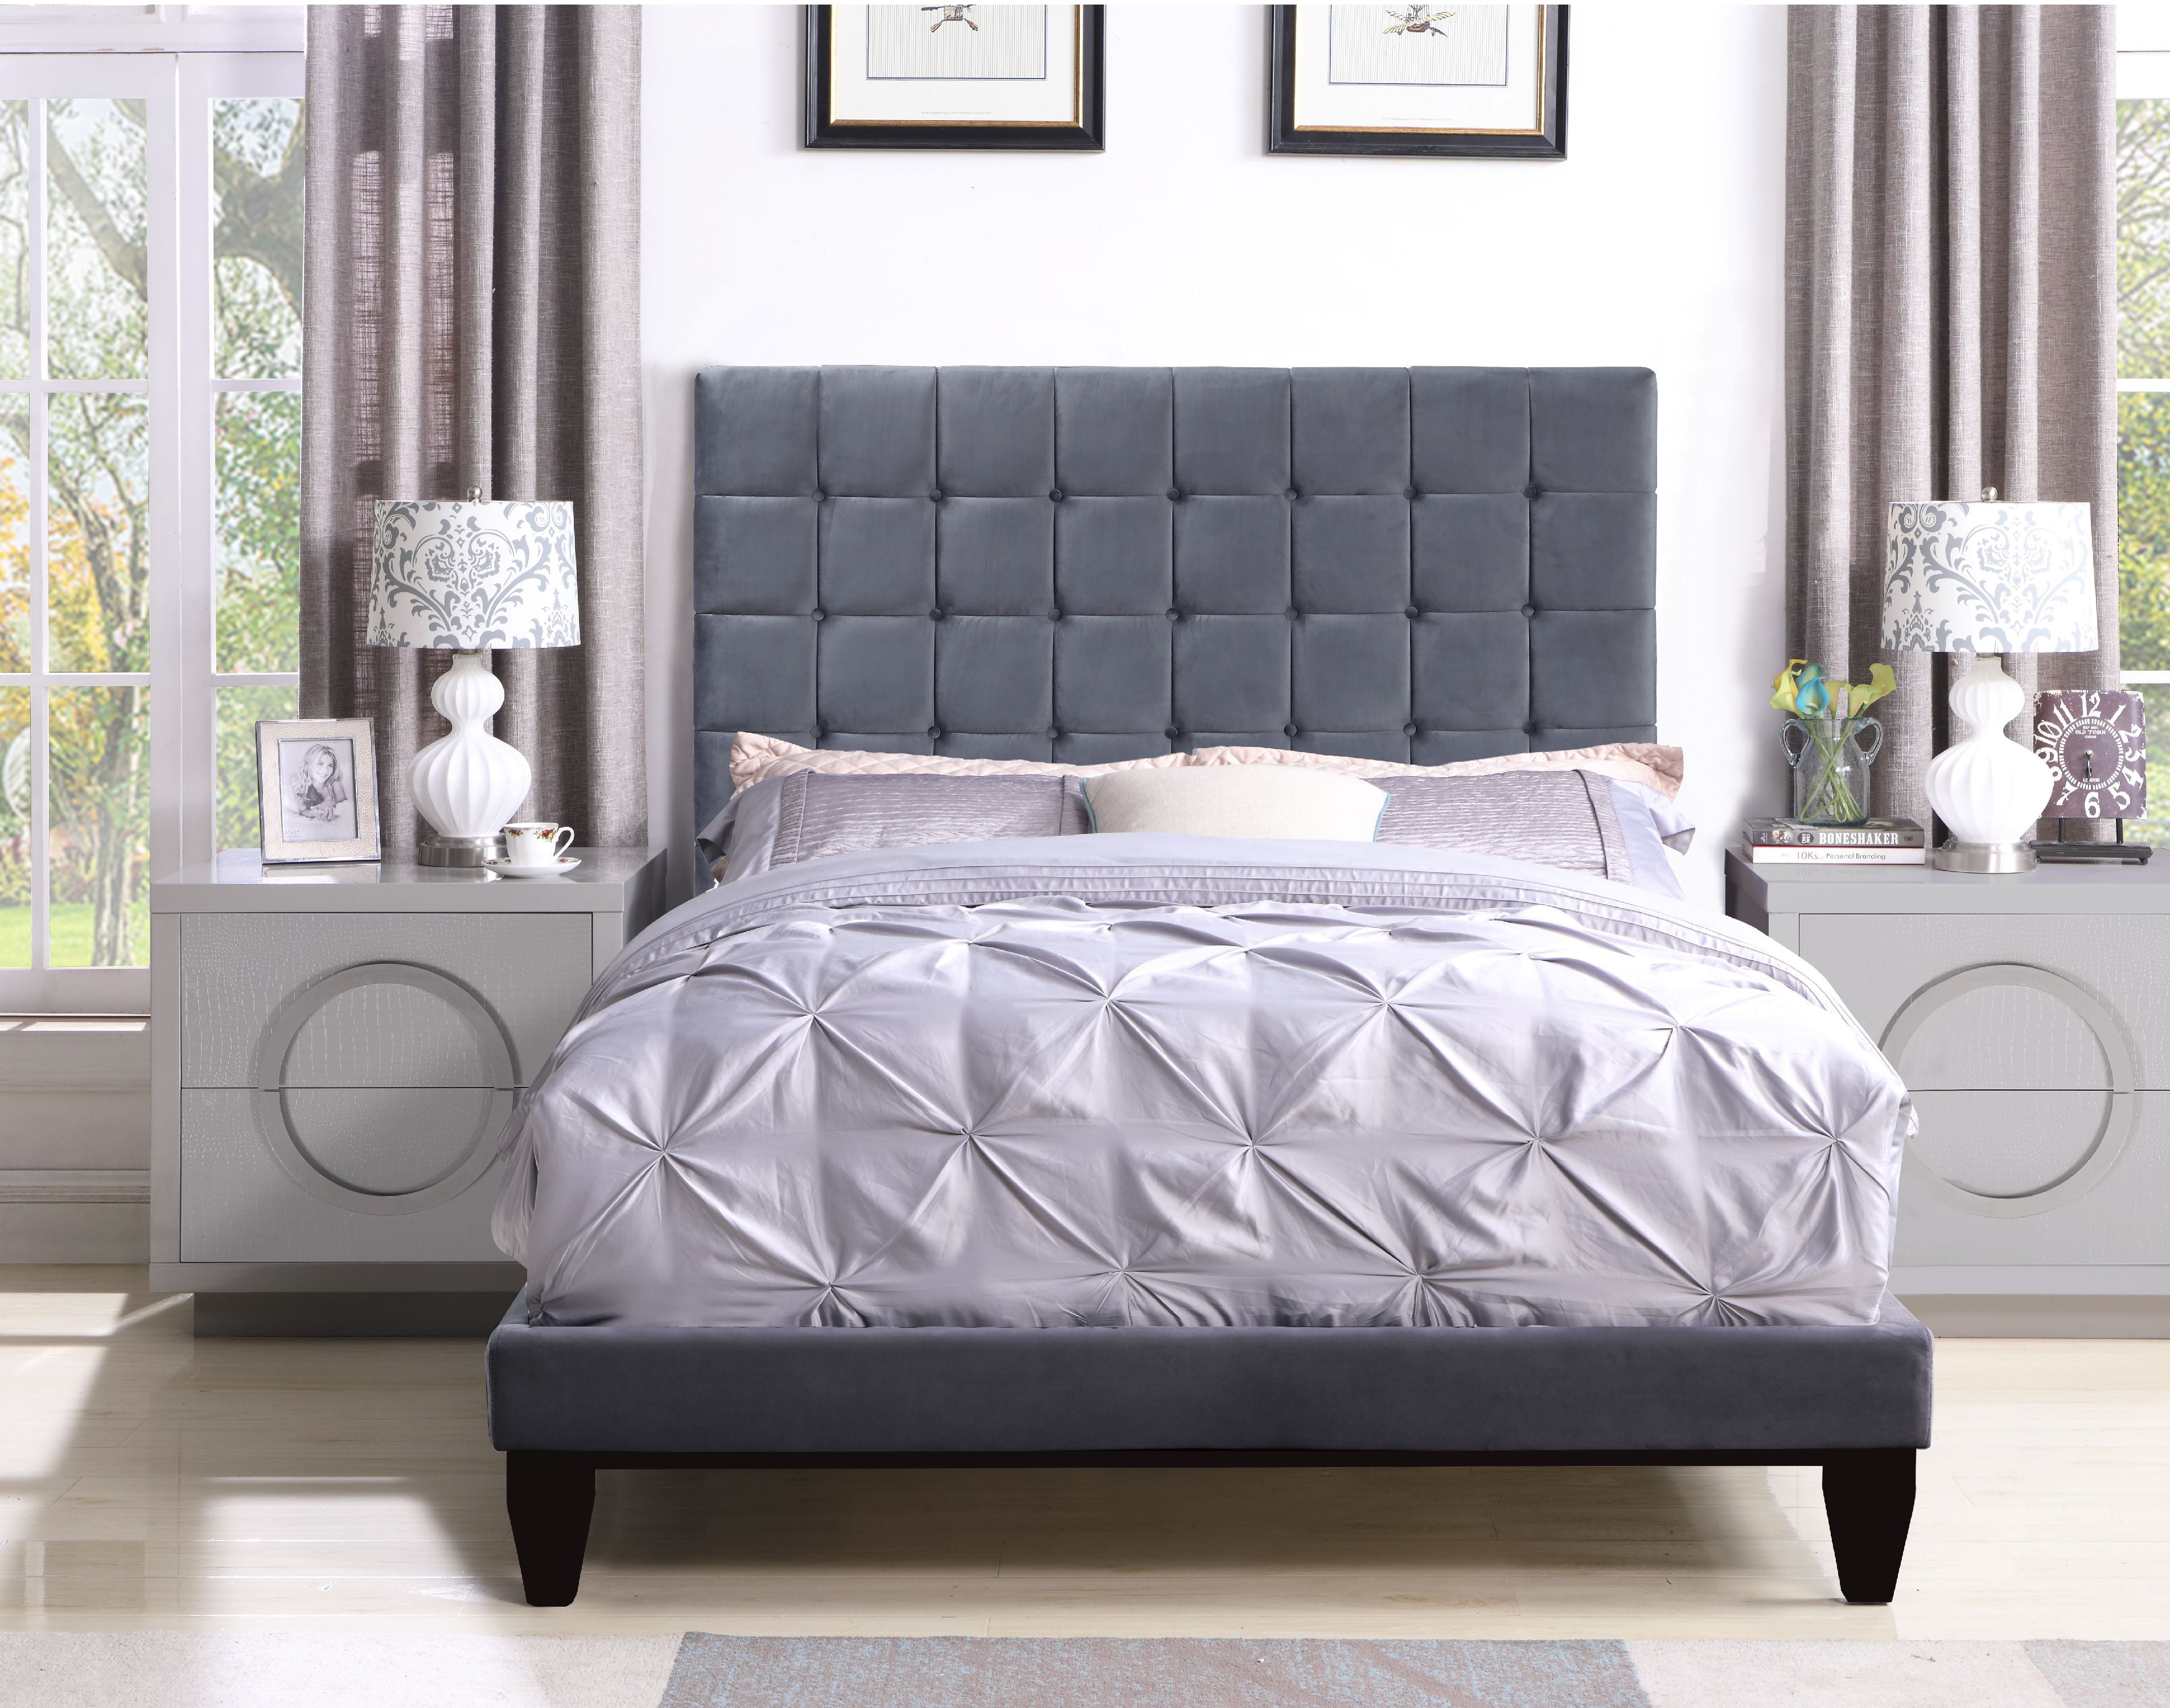 Fbd9150-us Handel Bed Frame With Headboard & Velvet Upholstered Button Tufted Tapered Birch Legs, Grey - Queen